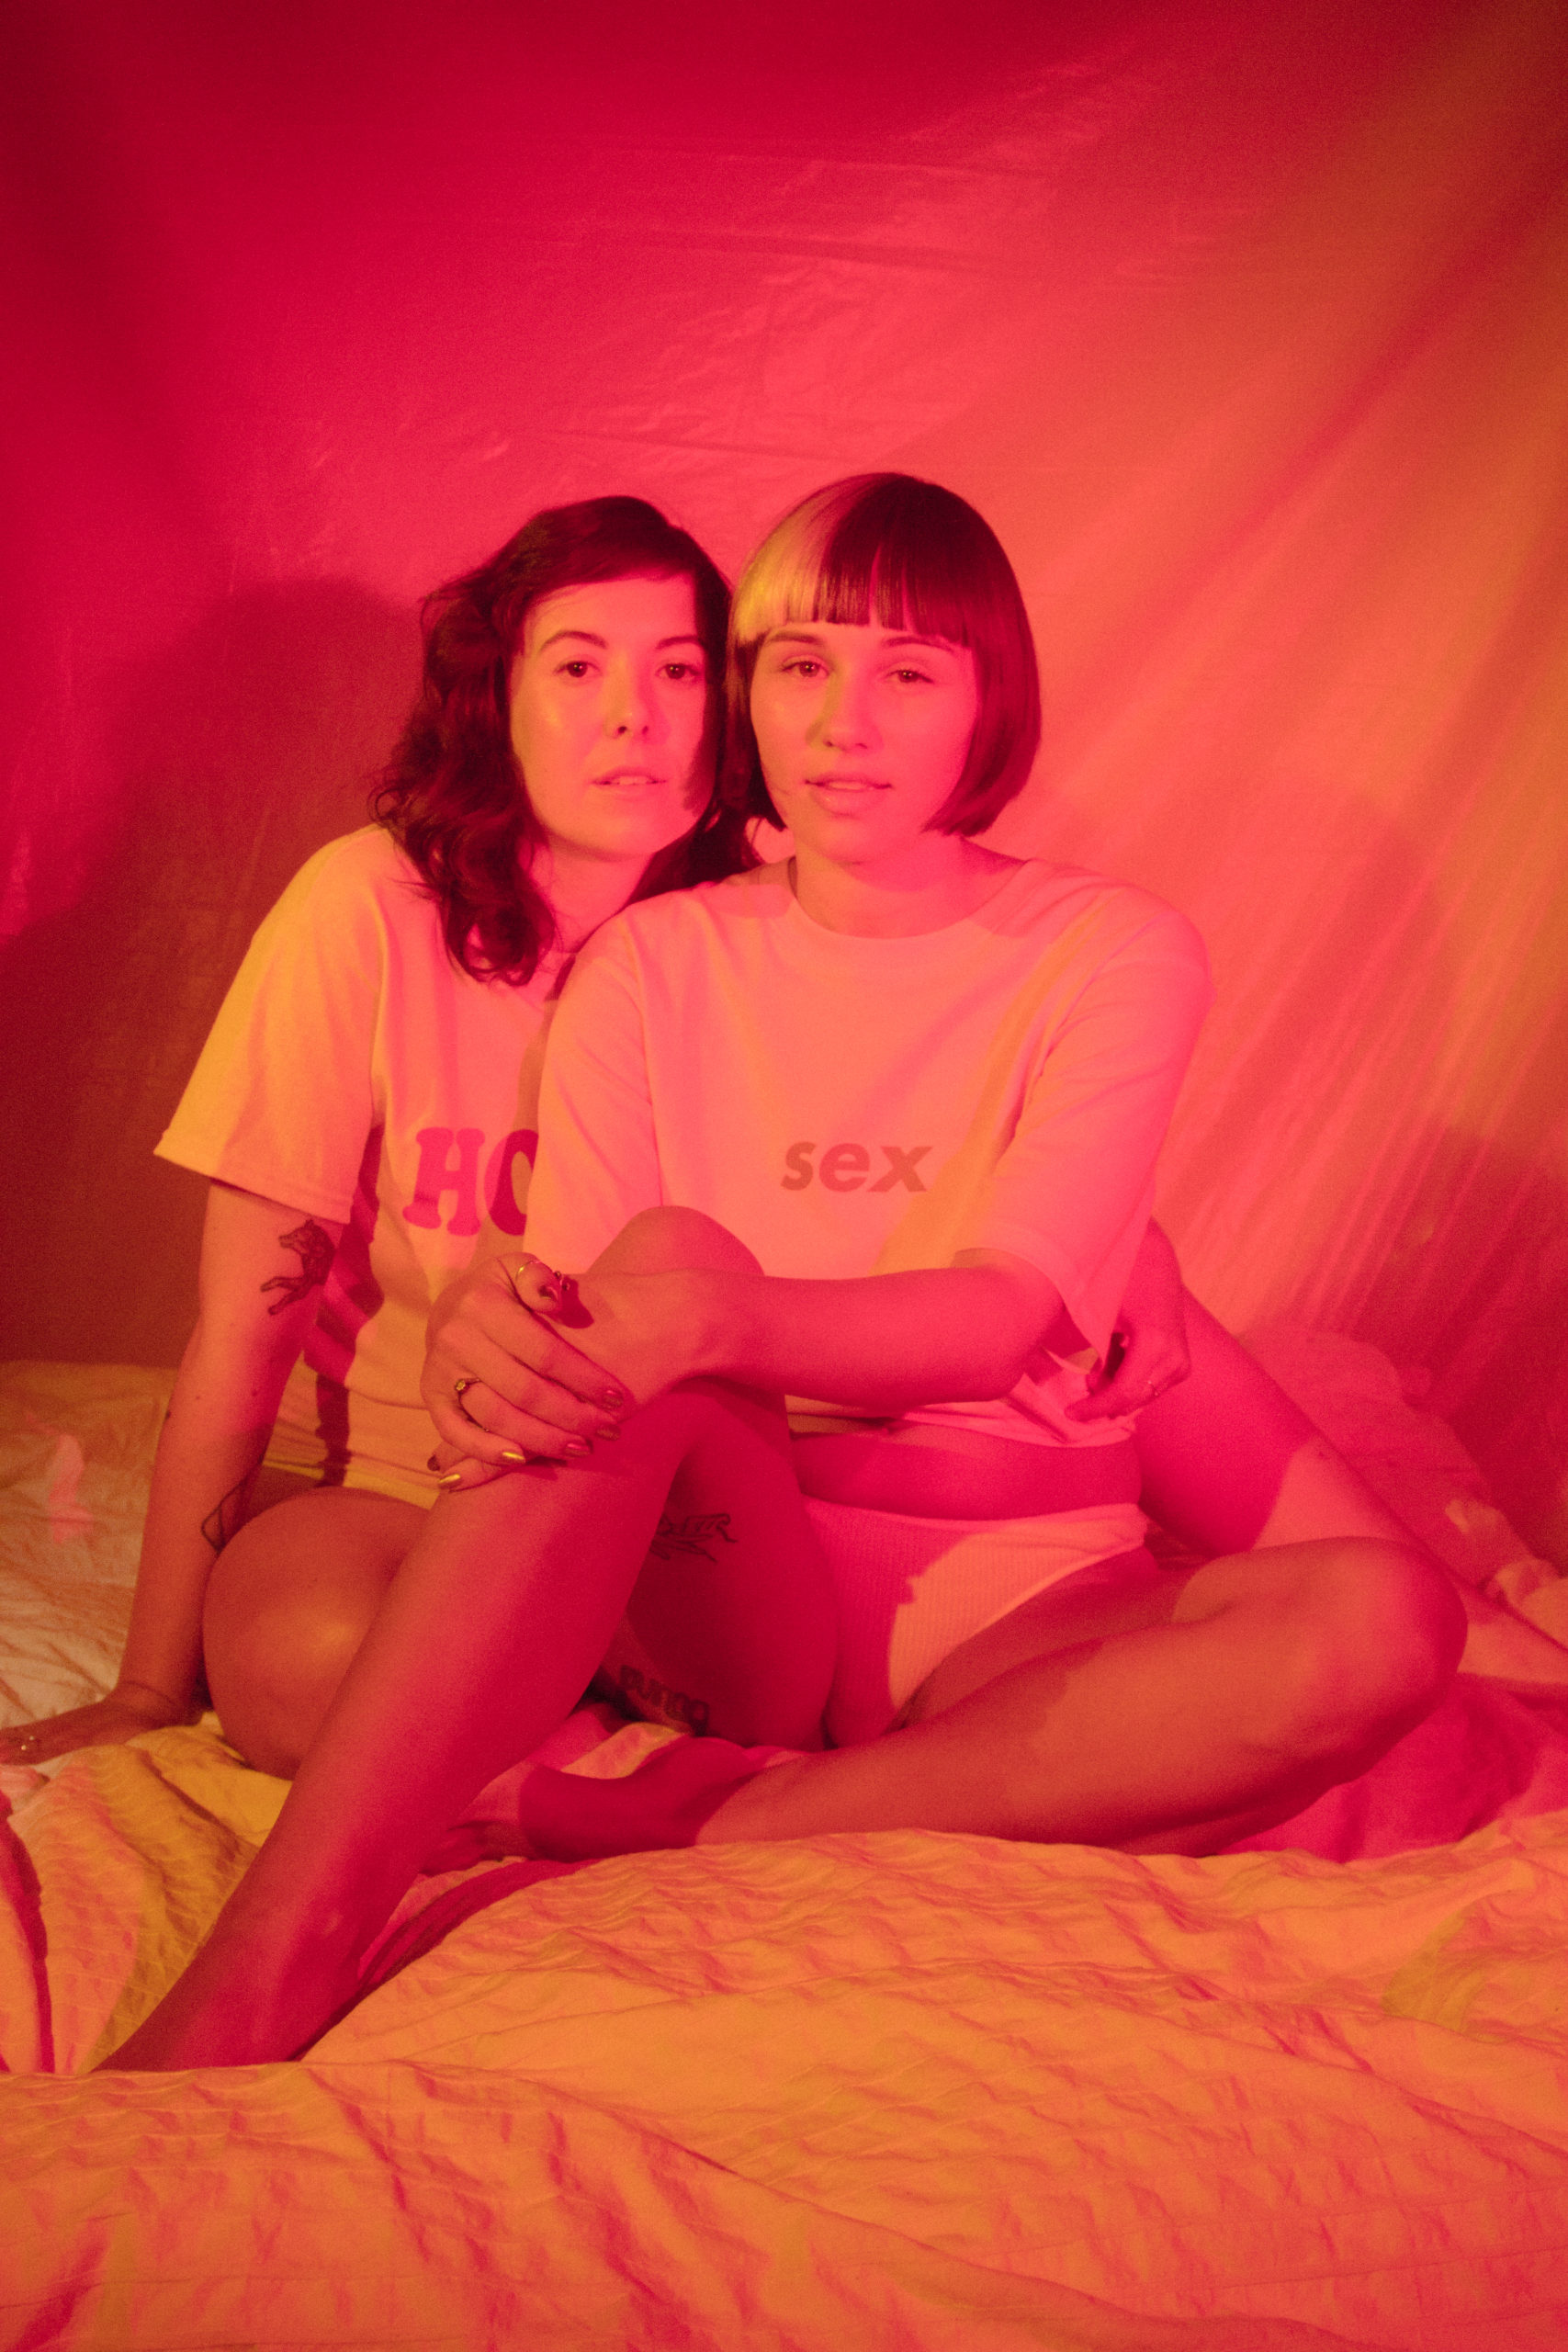 GUAP Interviews: The Ladies Of Come Curious To Talk Sex & Self-Love In Self-Isolation. [@ComeCurious]